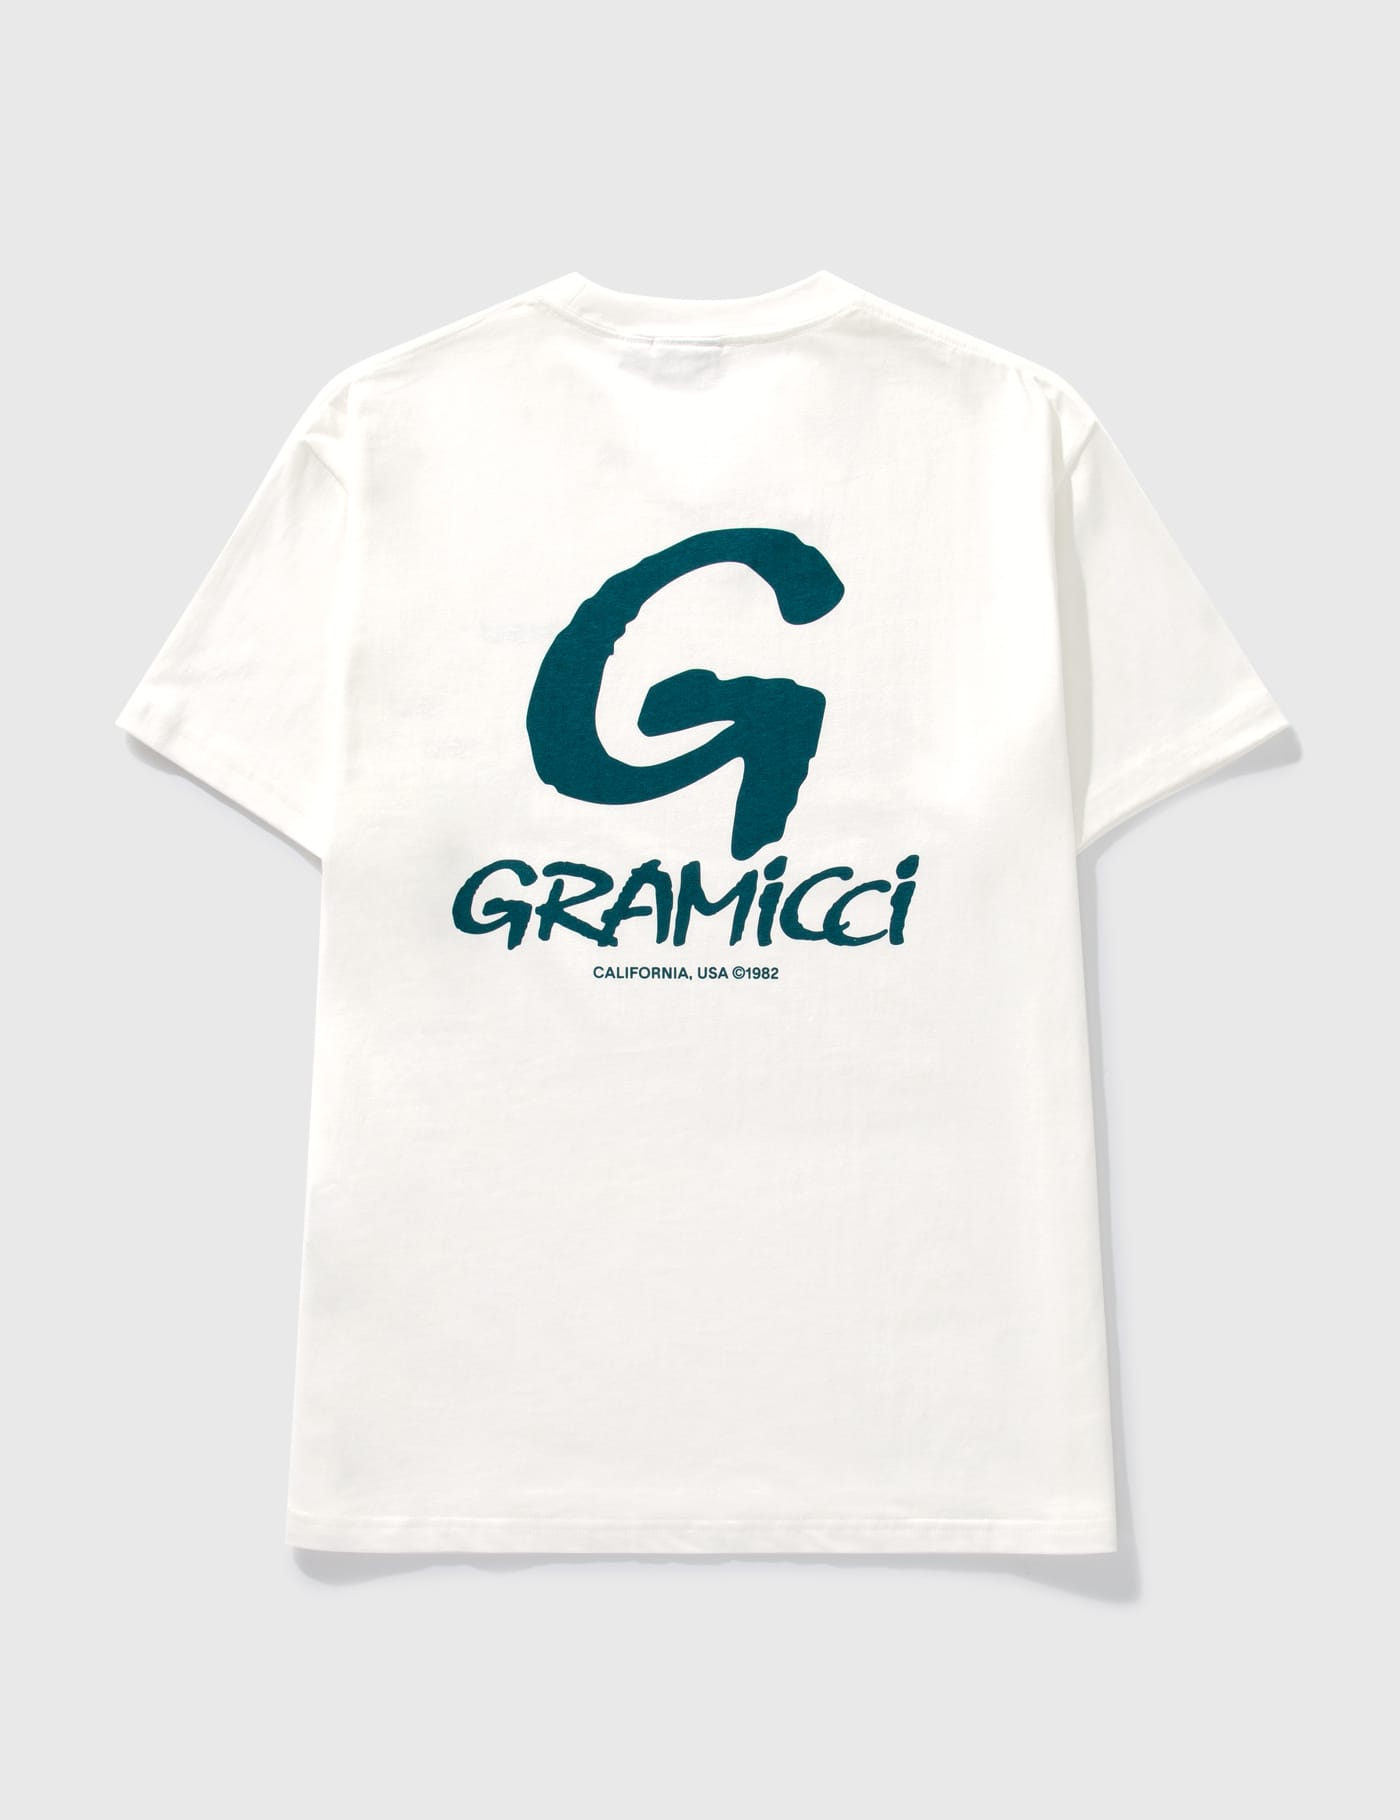 Gramicci | HBX - Globally Curated Fashion and Lifestyle by Hypebeast